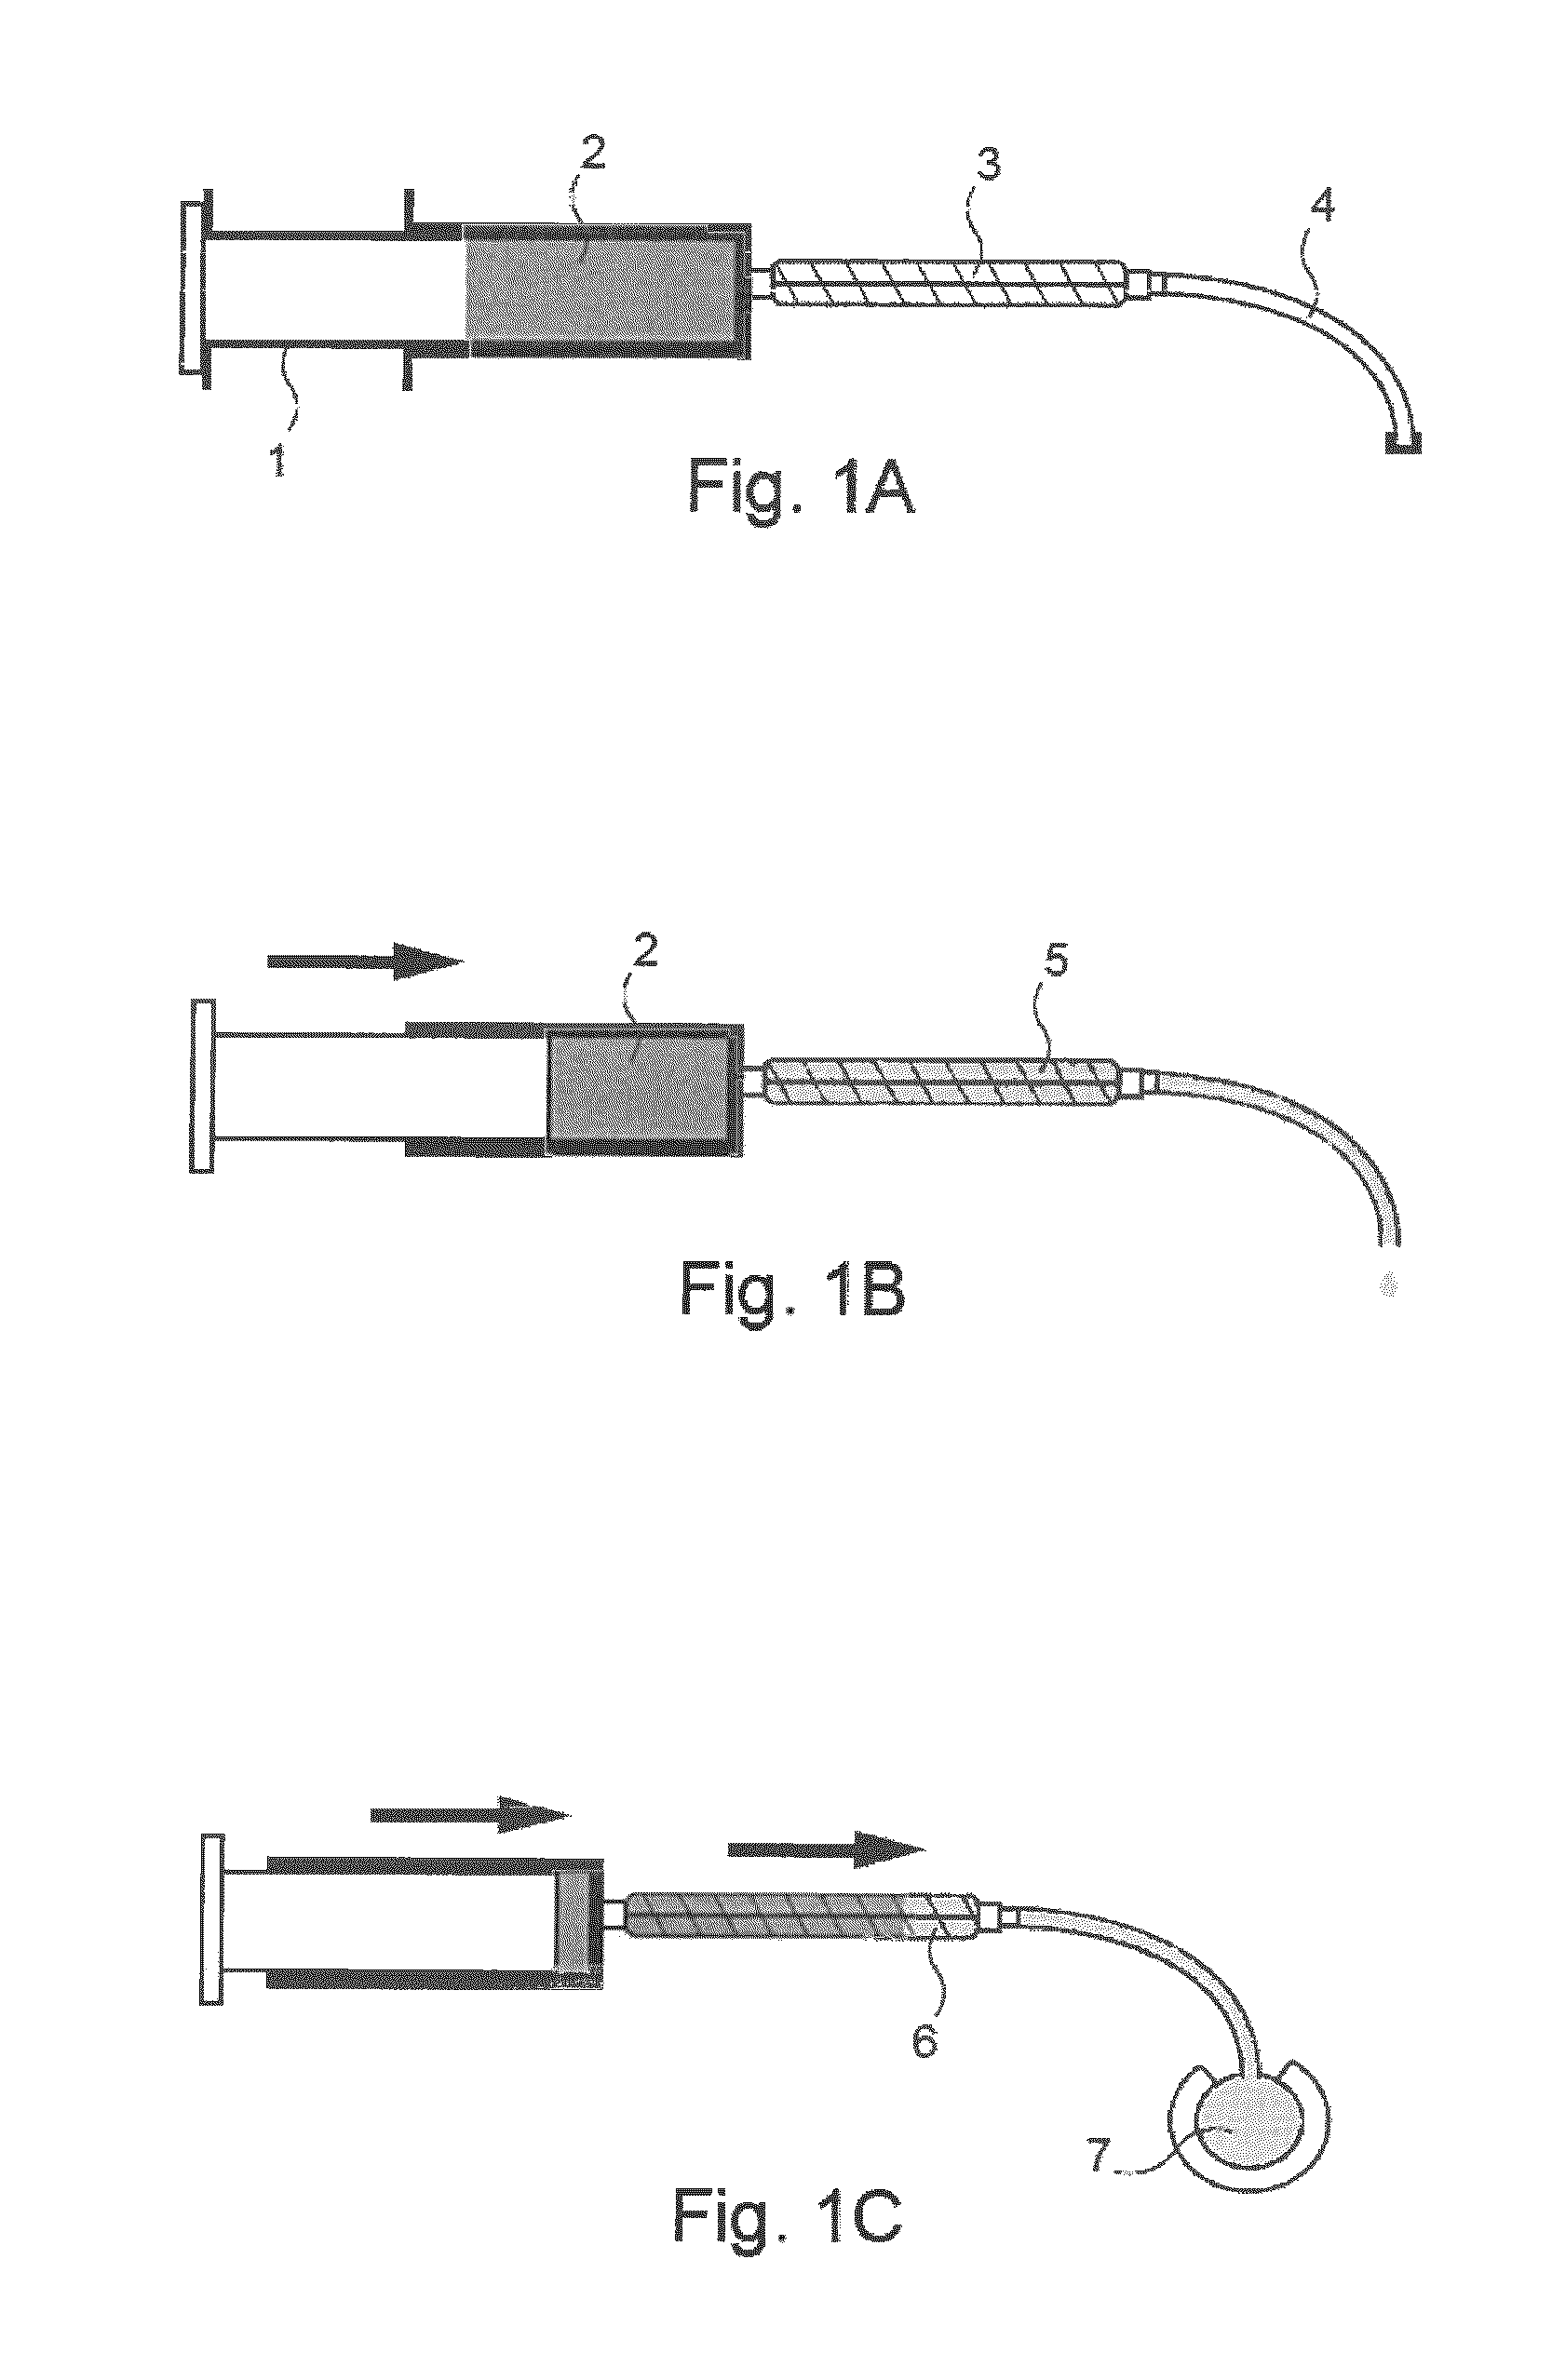 Polymer cements used for fixing prostheses, for bone repair and for vertebroplasty, and obtained from liquid single-phase formulations